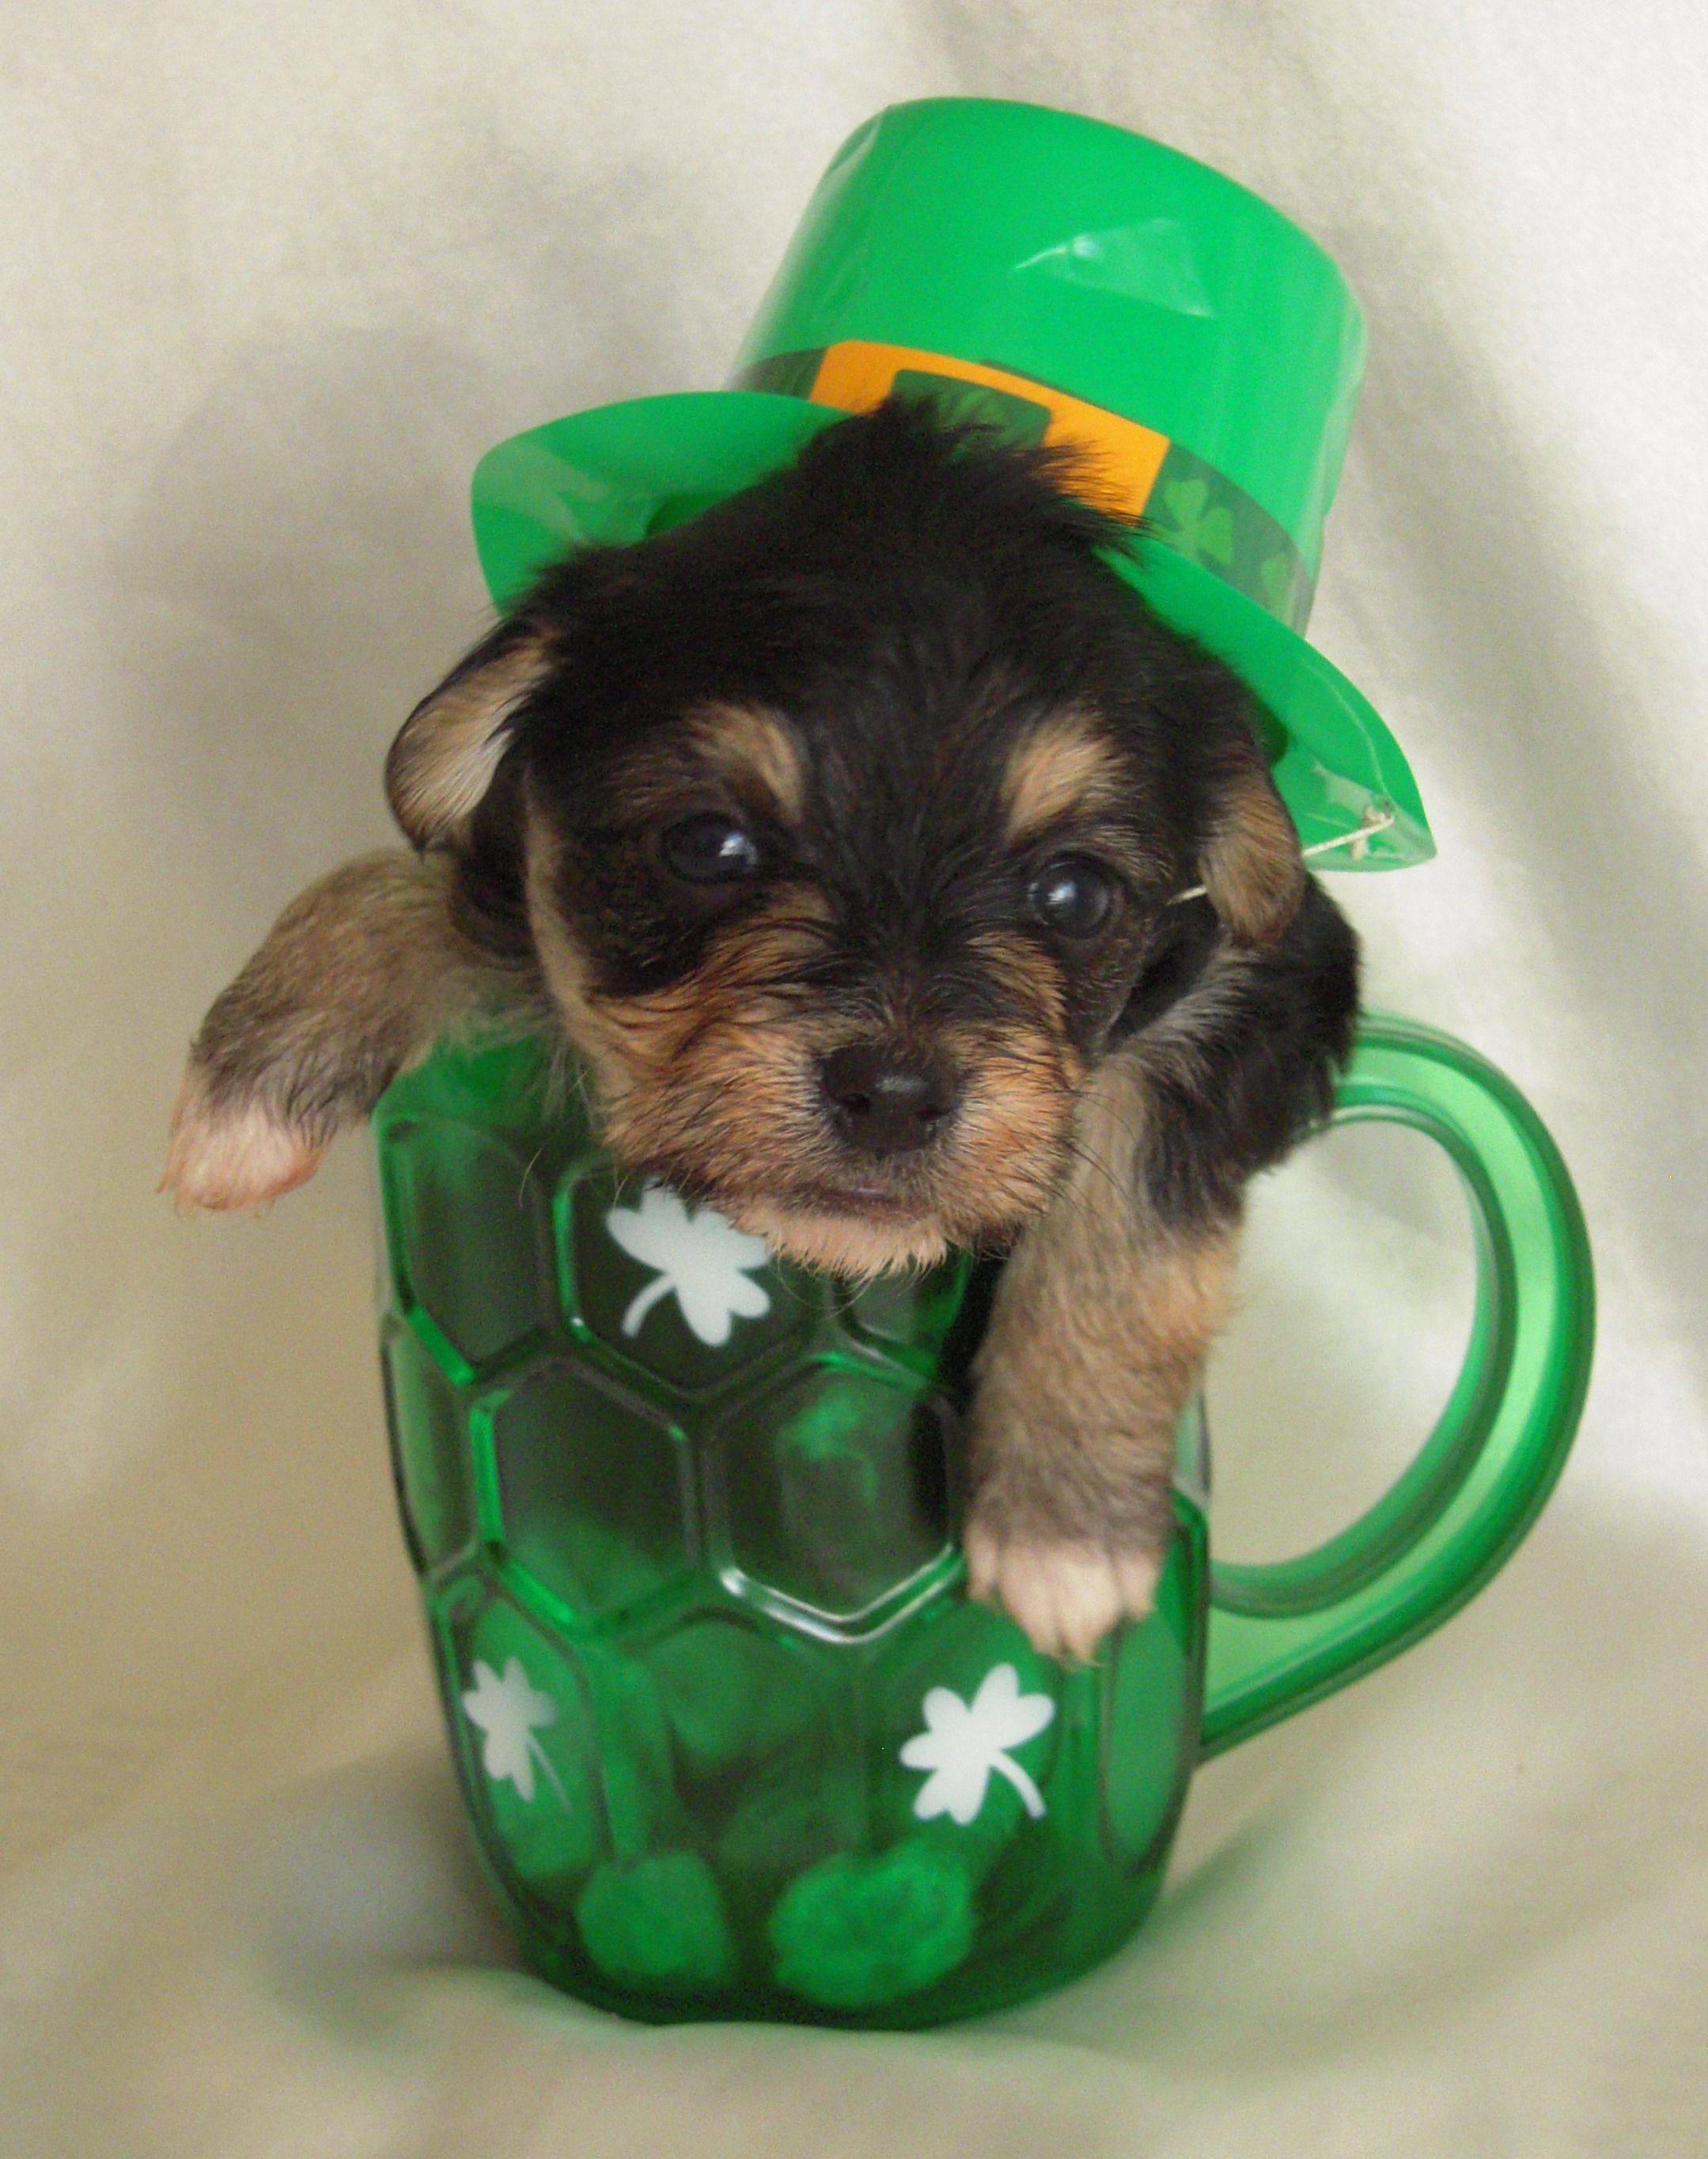 Best St. Patrick's Puppies image. Puppies, Pets, Cute animals